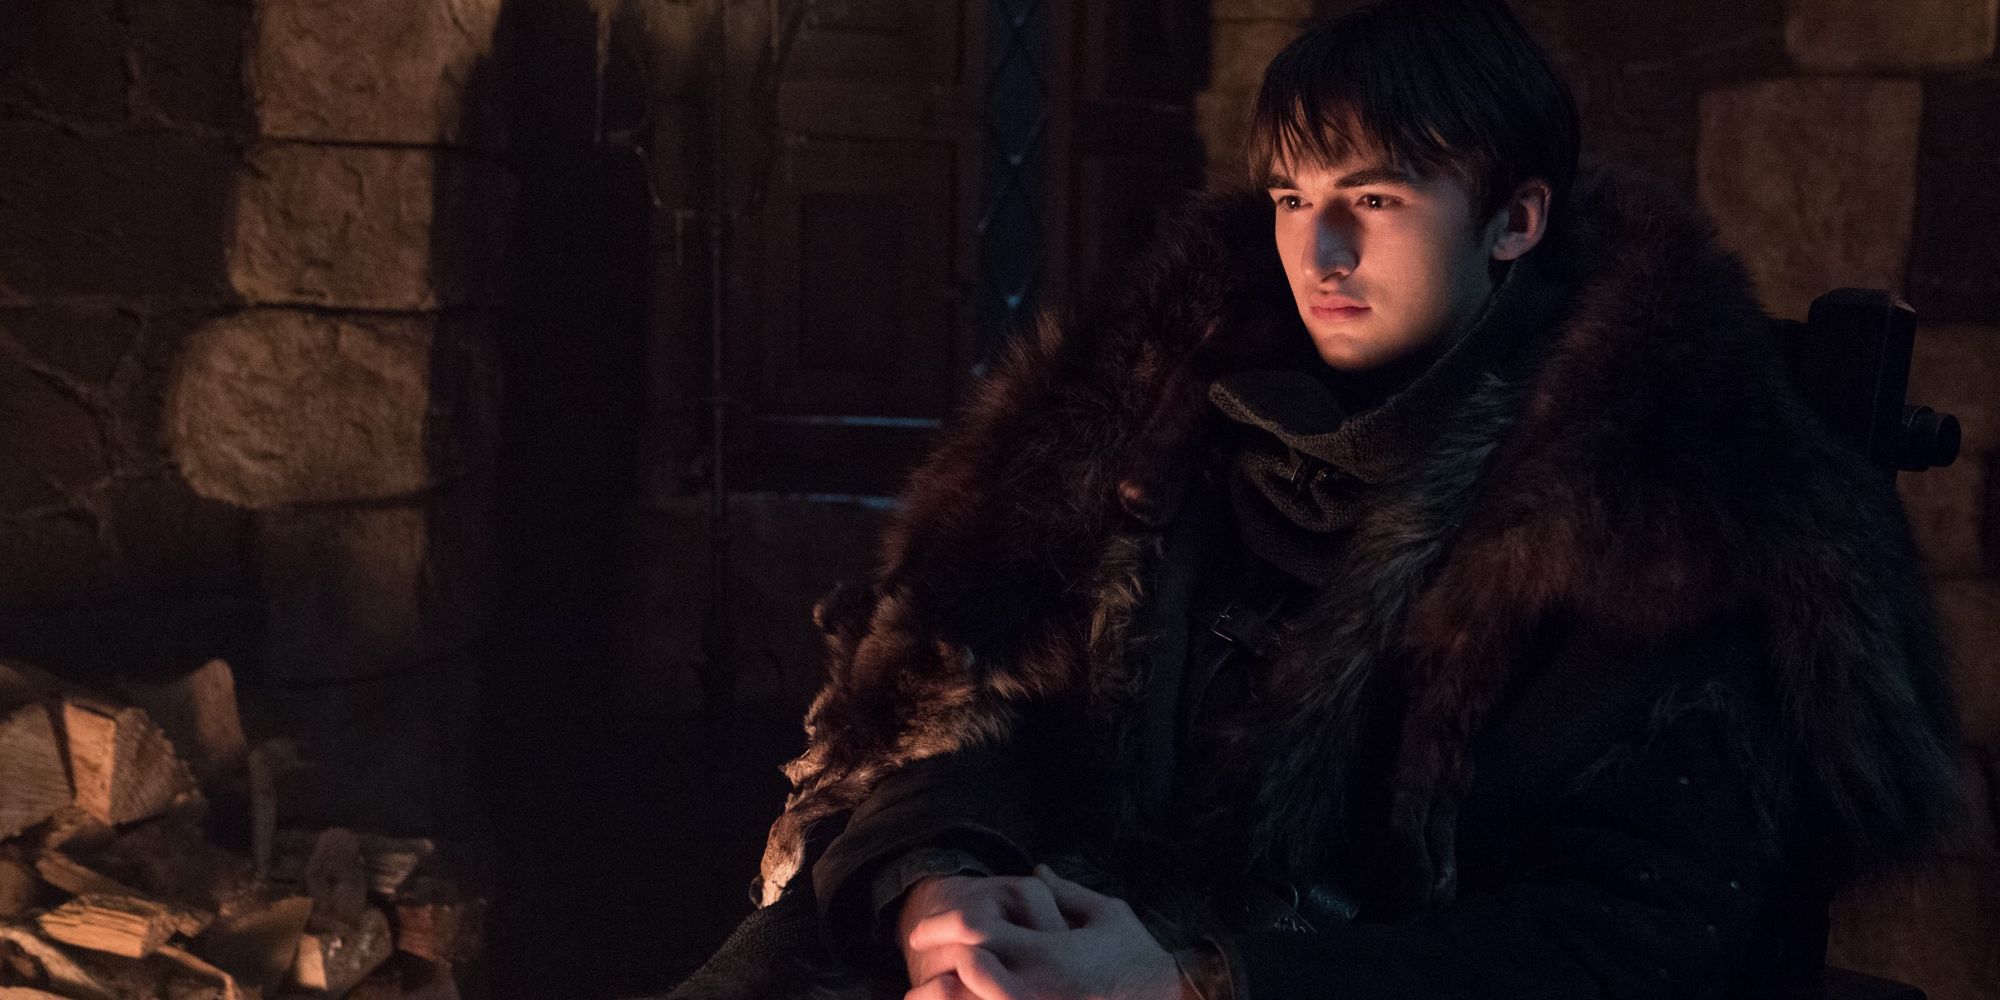 Isaac Hempsted Wright in Game of Thrones Season 8